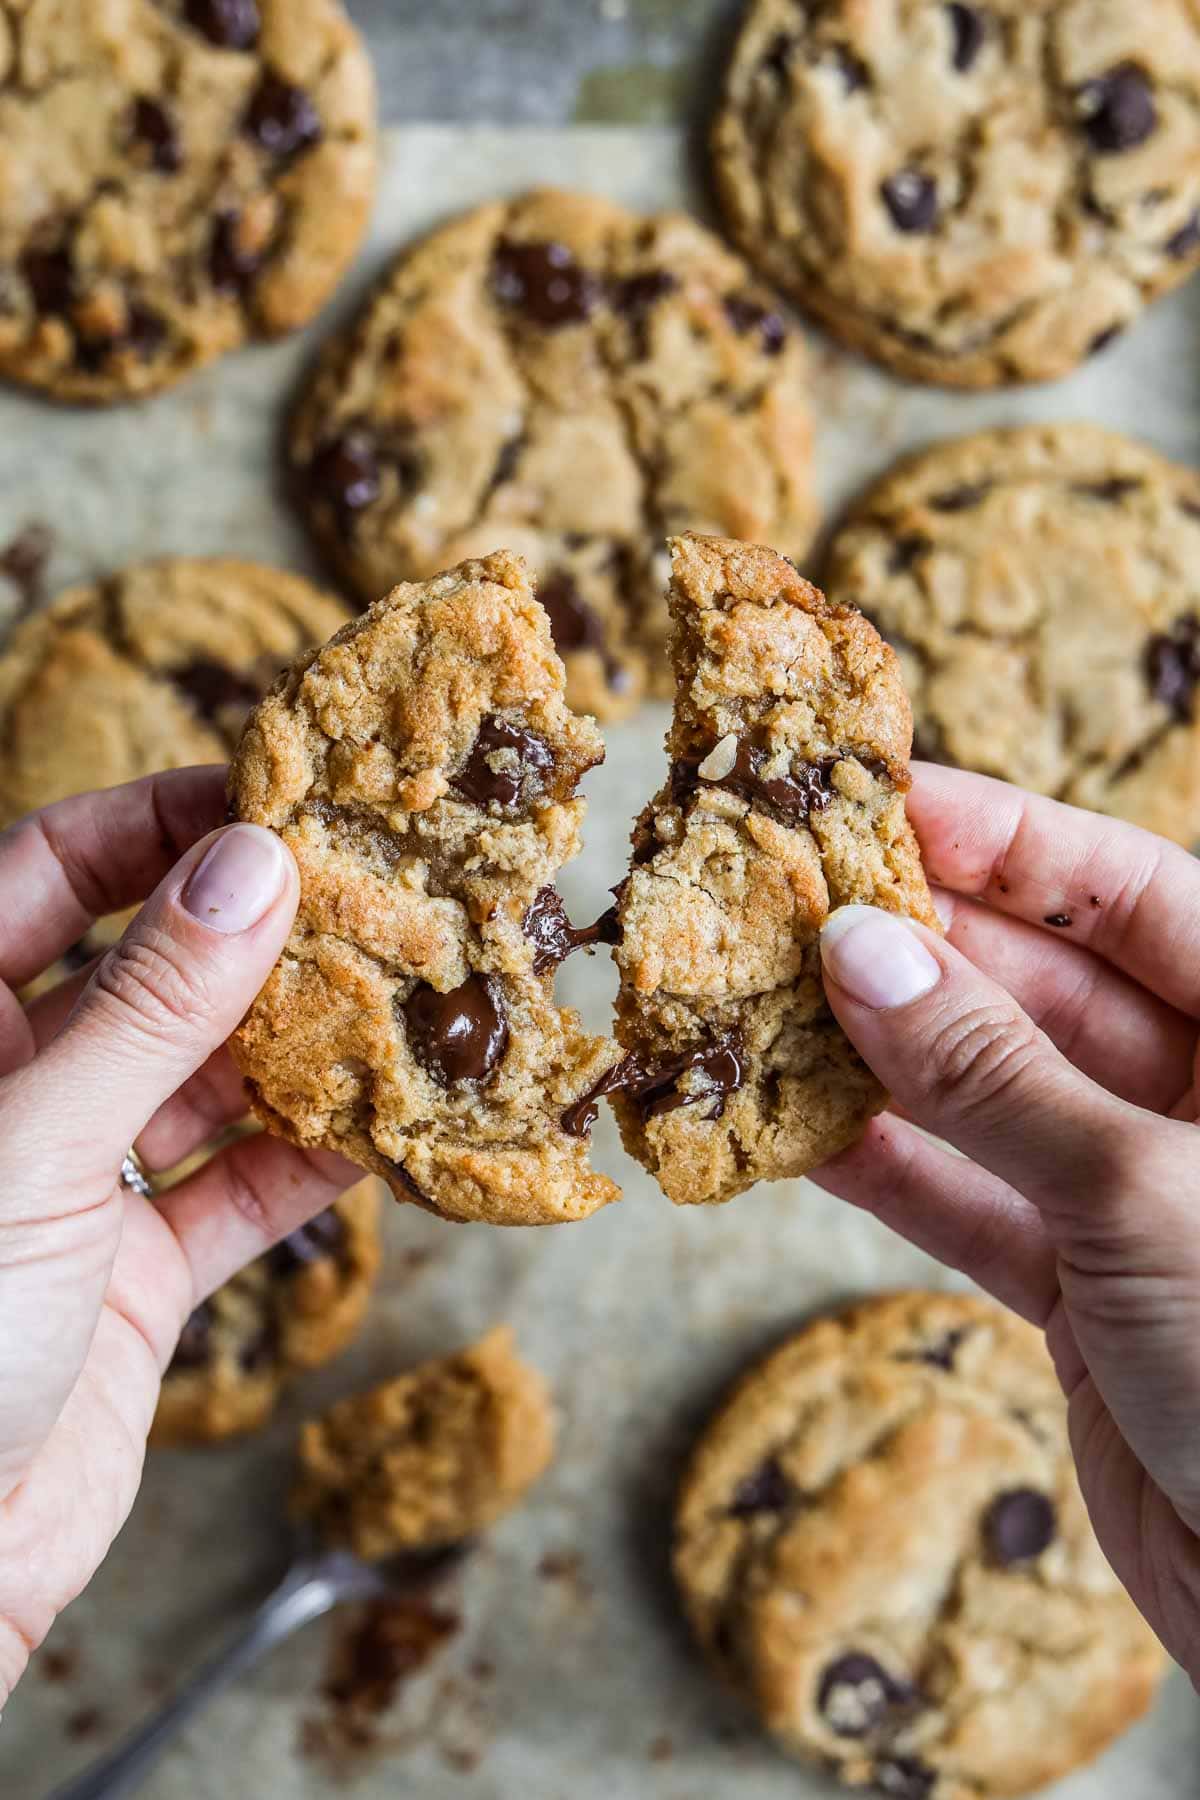 Hands breaking apart a miso toffee browned butter chocolate chip cookies with warm melted chocolate in the center.